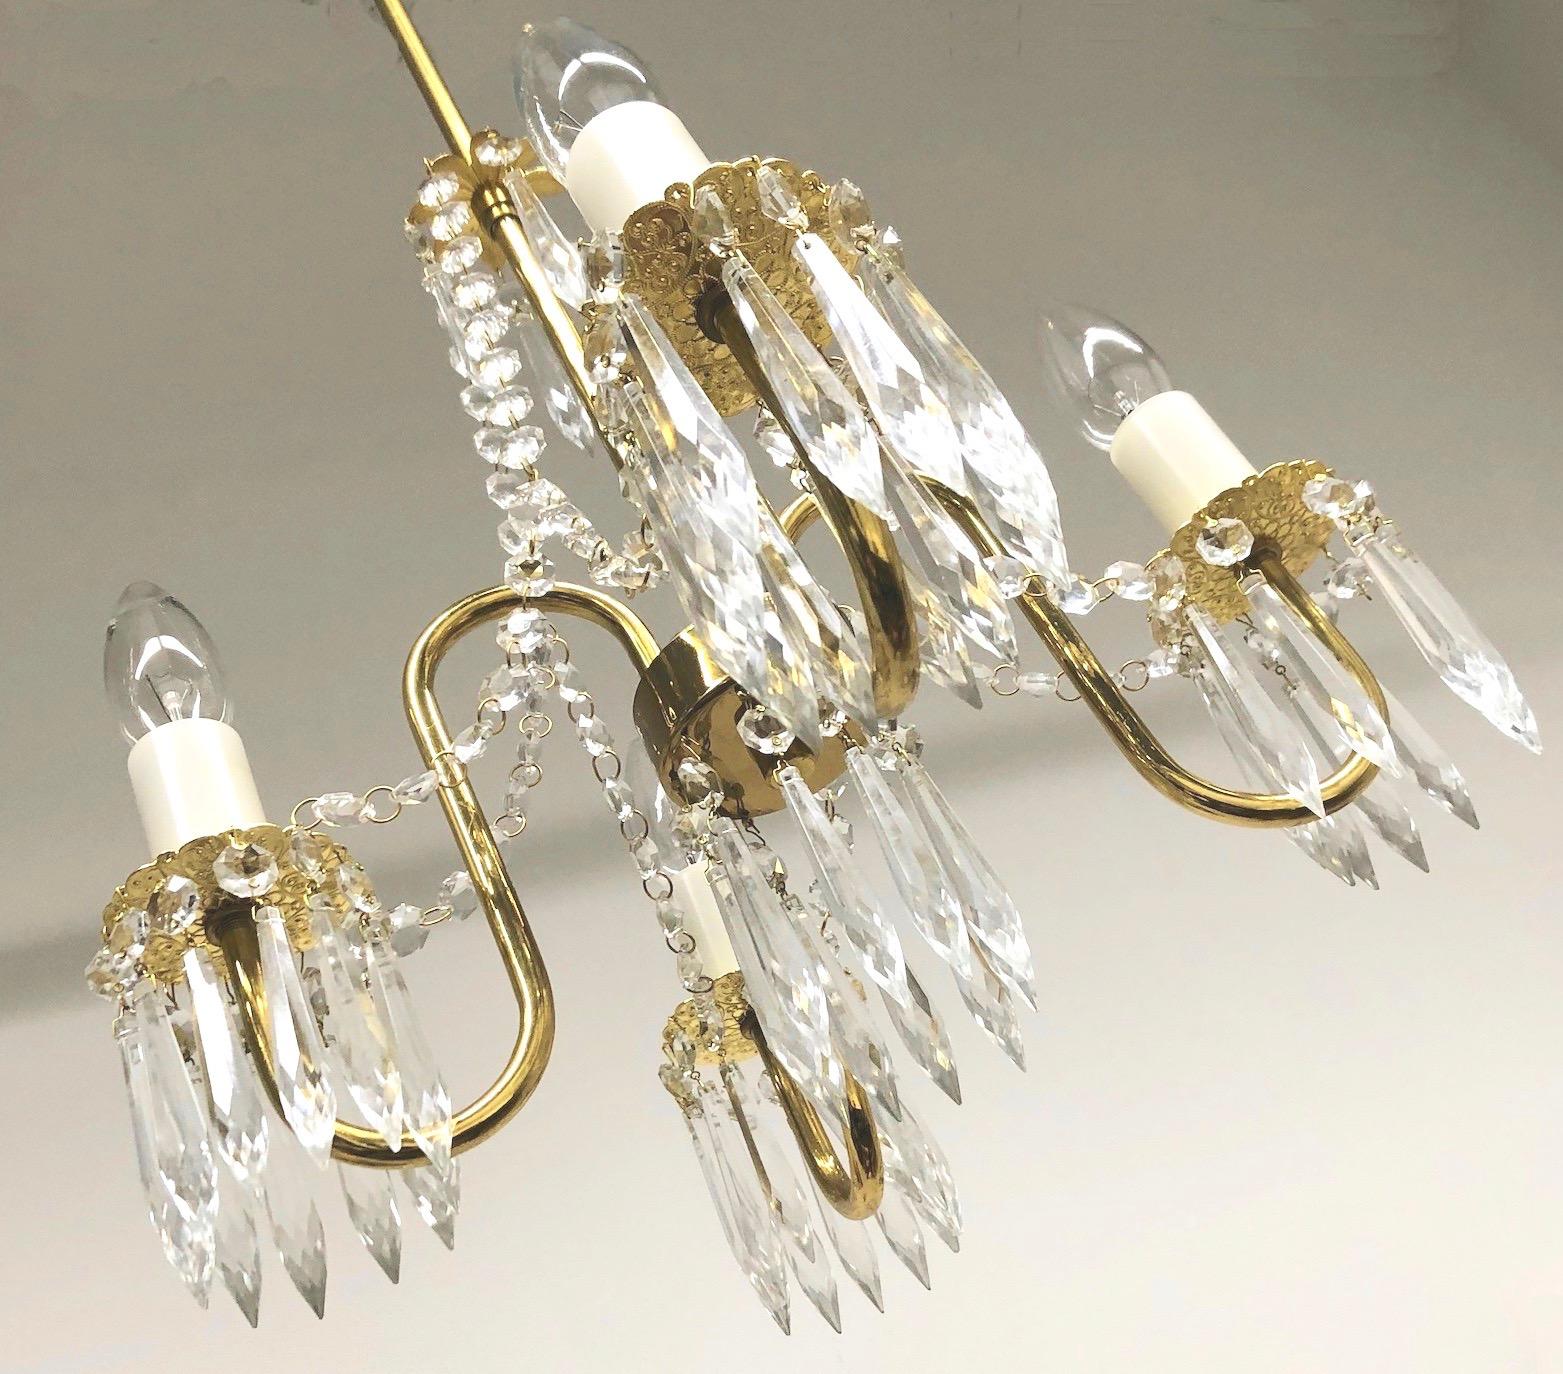 Empire Style Crystal Chandelier with Four Lights, 1950s, Austria (Glas)